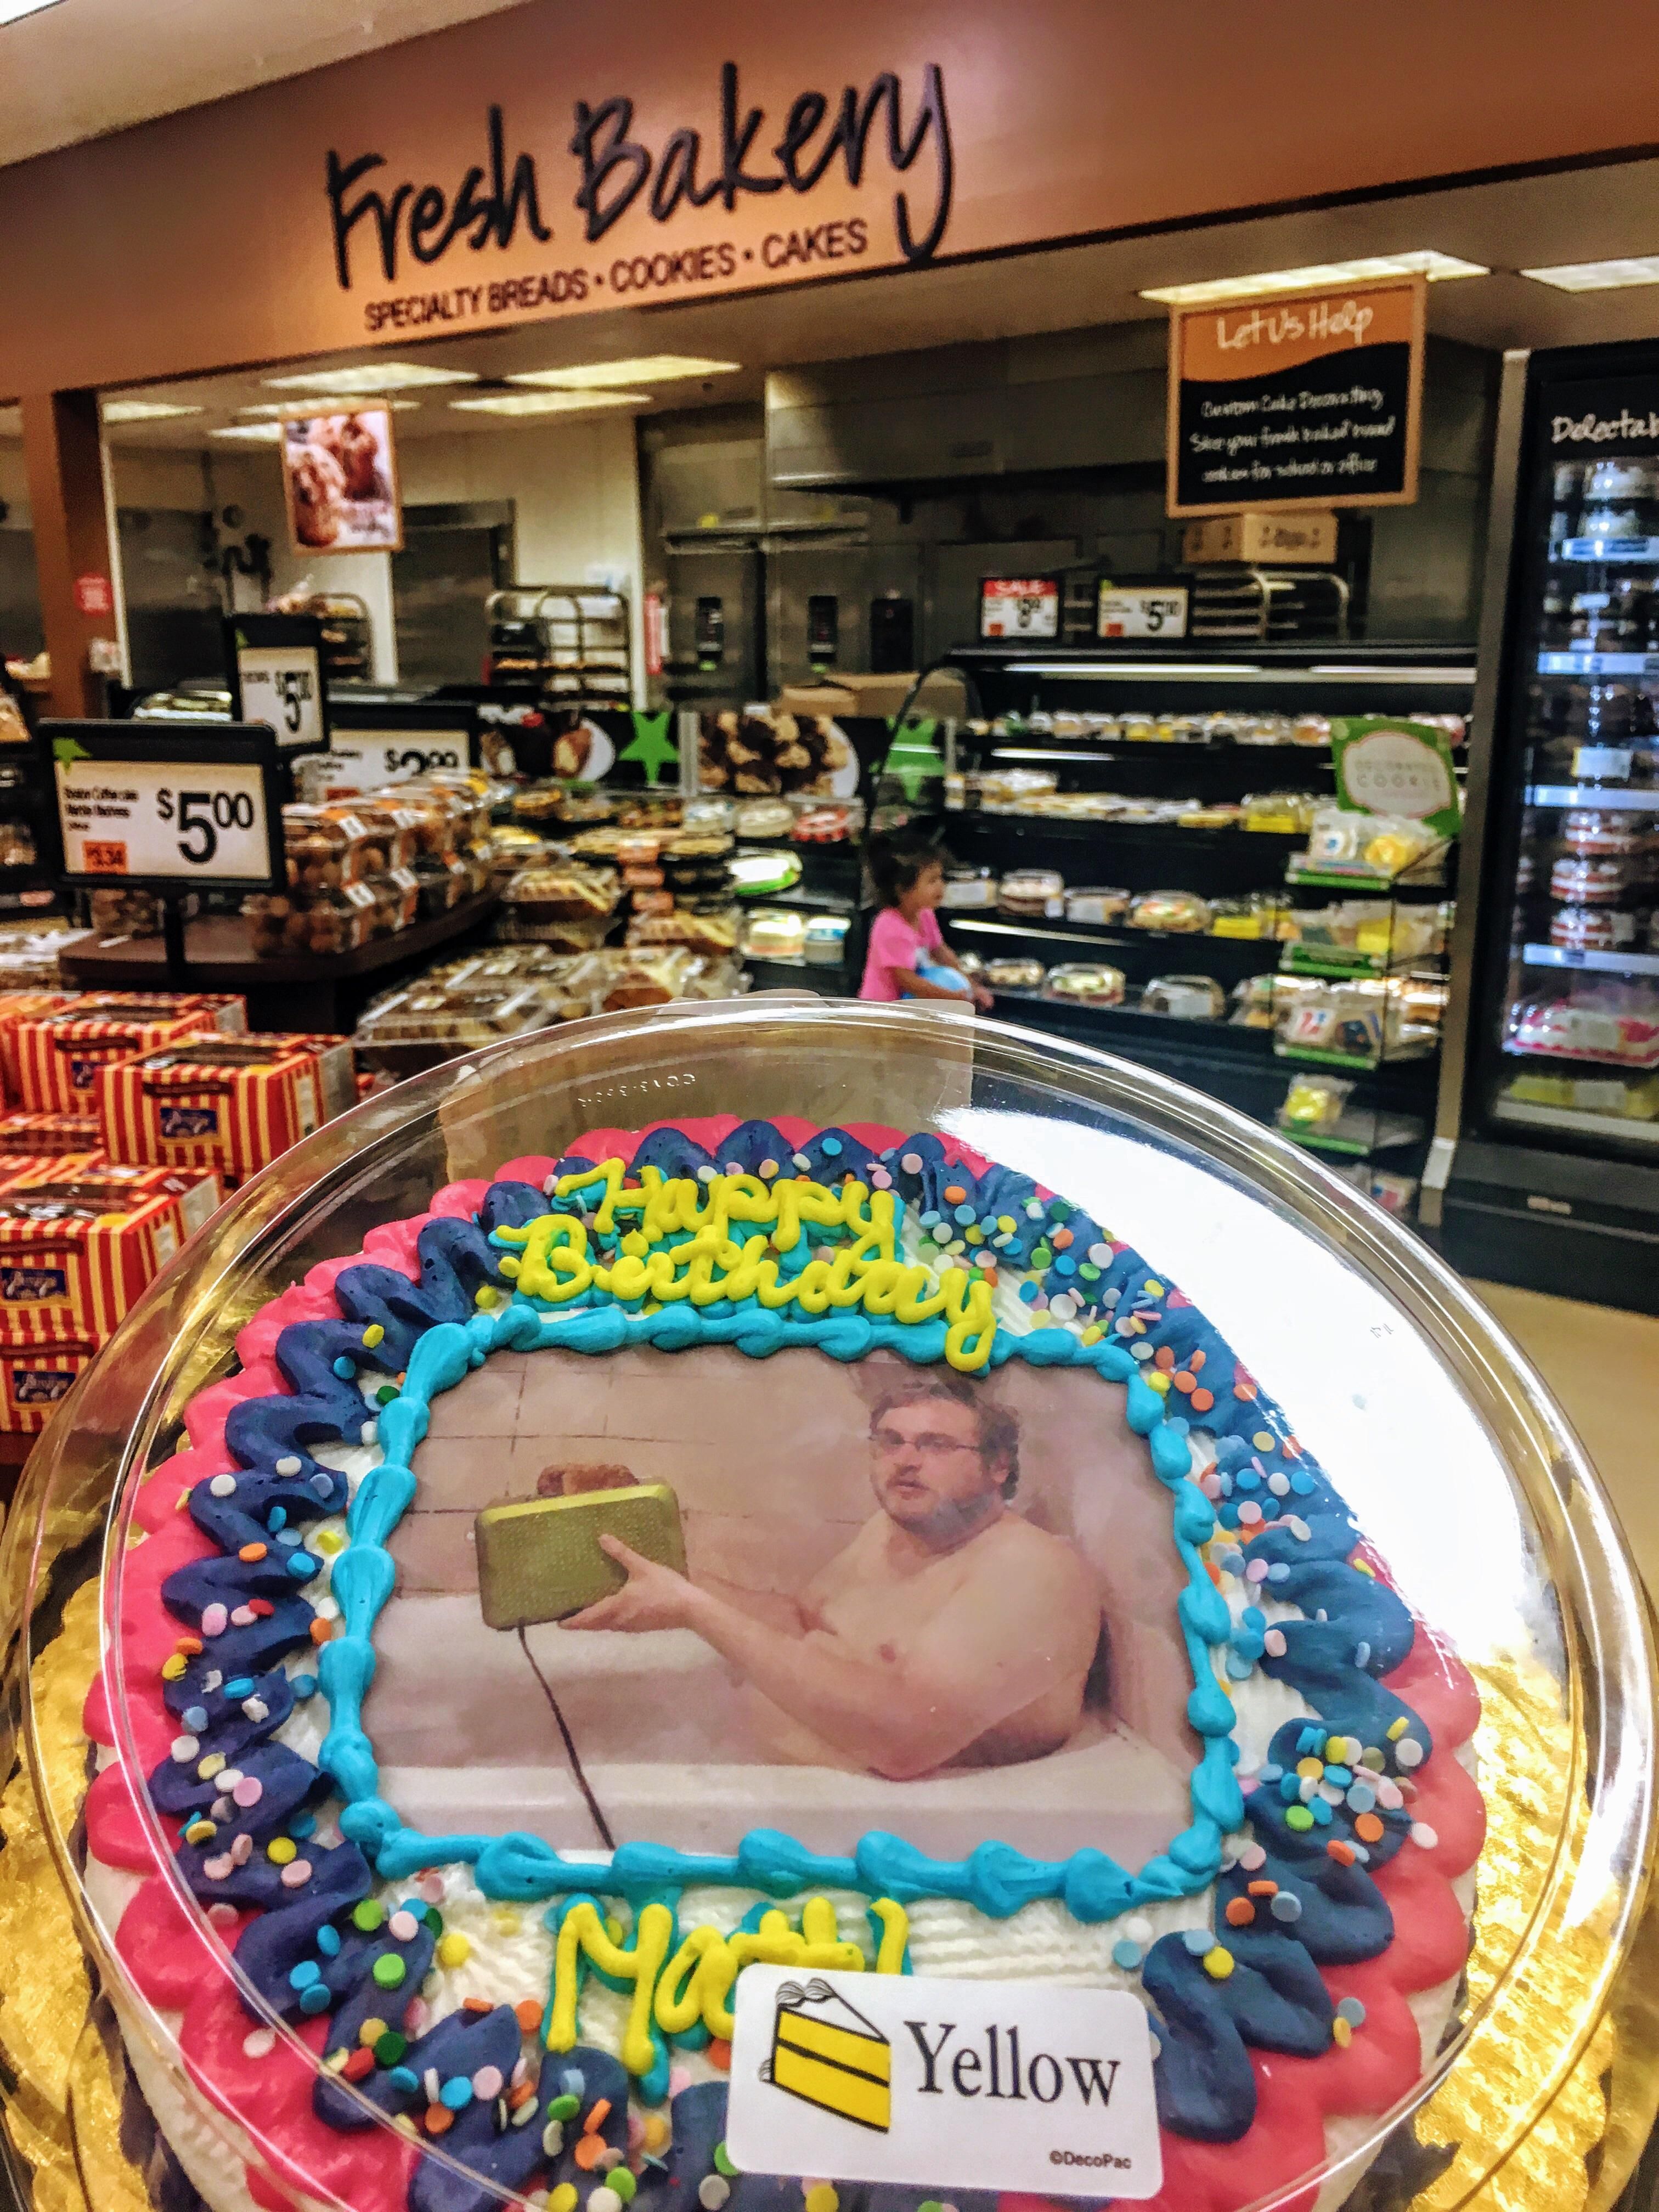 The Star Market in my town is awesome.